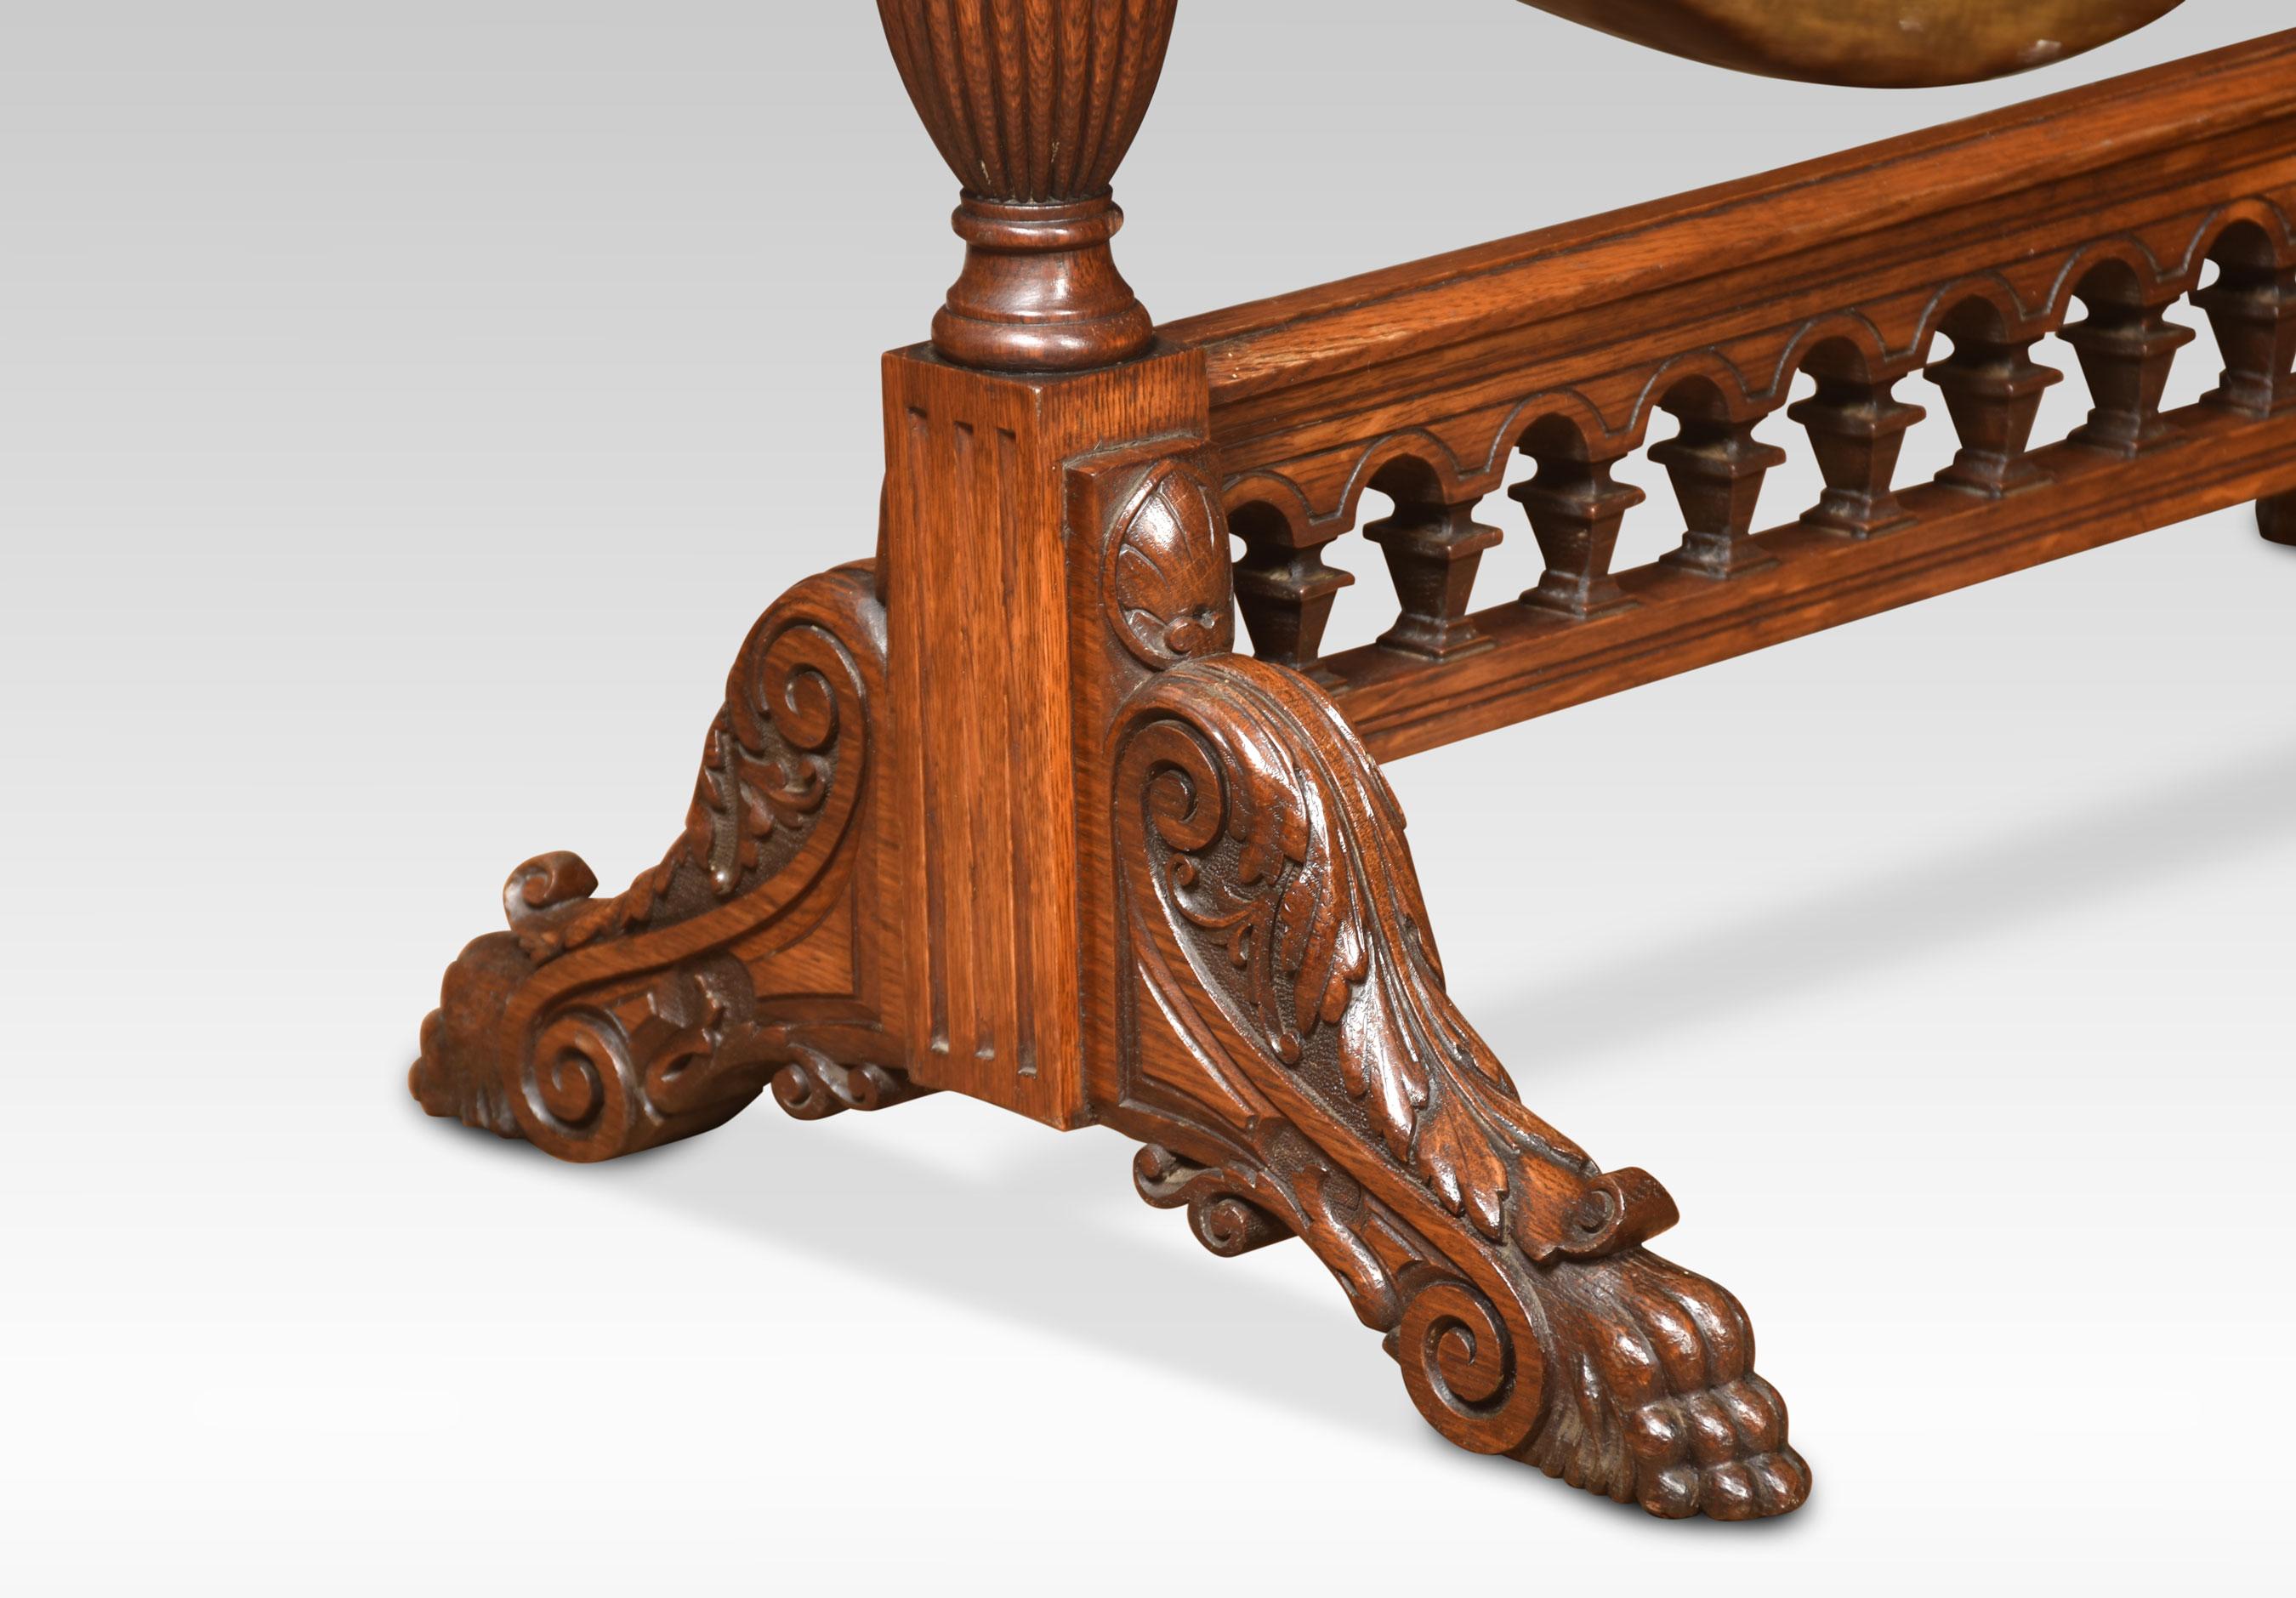 Walnut framed floor standing diner gong and beater, the carved crest, flanked by turned finials raised on reeded carved pillars and a bobbin turned gallery below, raised on scrolling legs and hairy paw feet.
Dimensions
Height 42 inches
Width 30